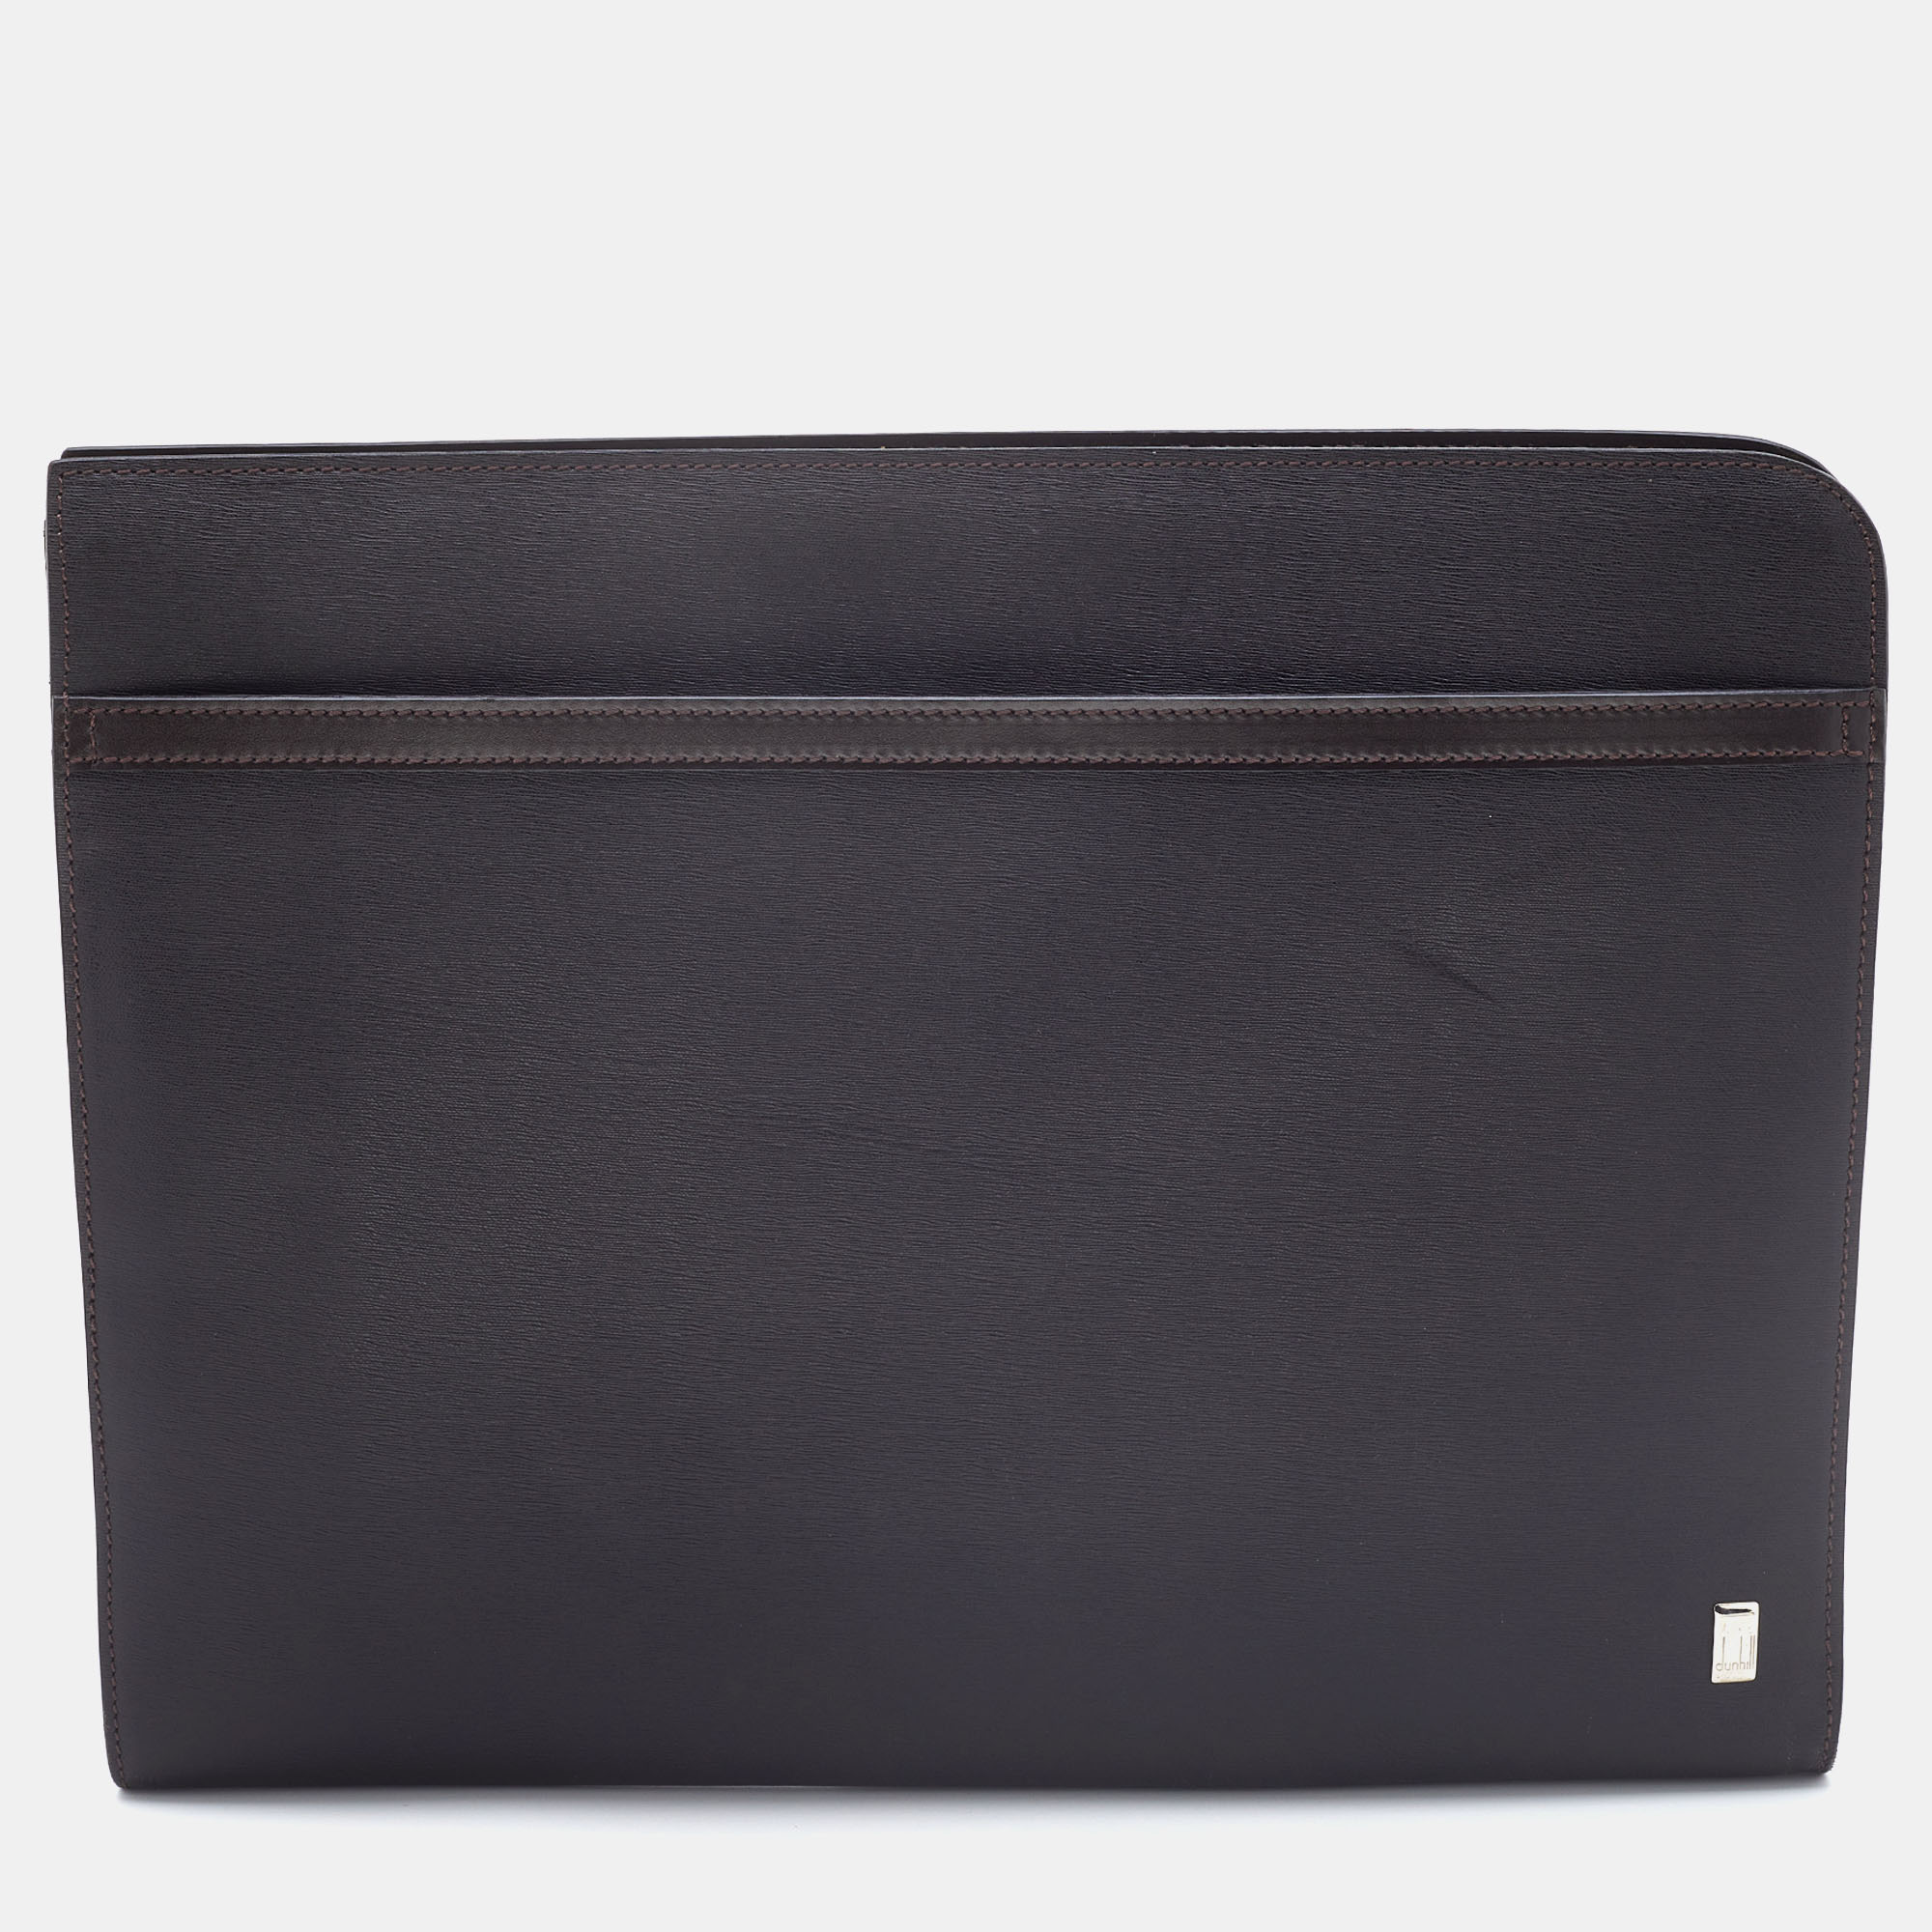 Dunhill Brown Leather Documents Portfolio Case